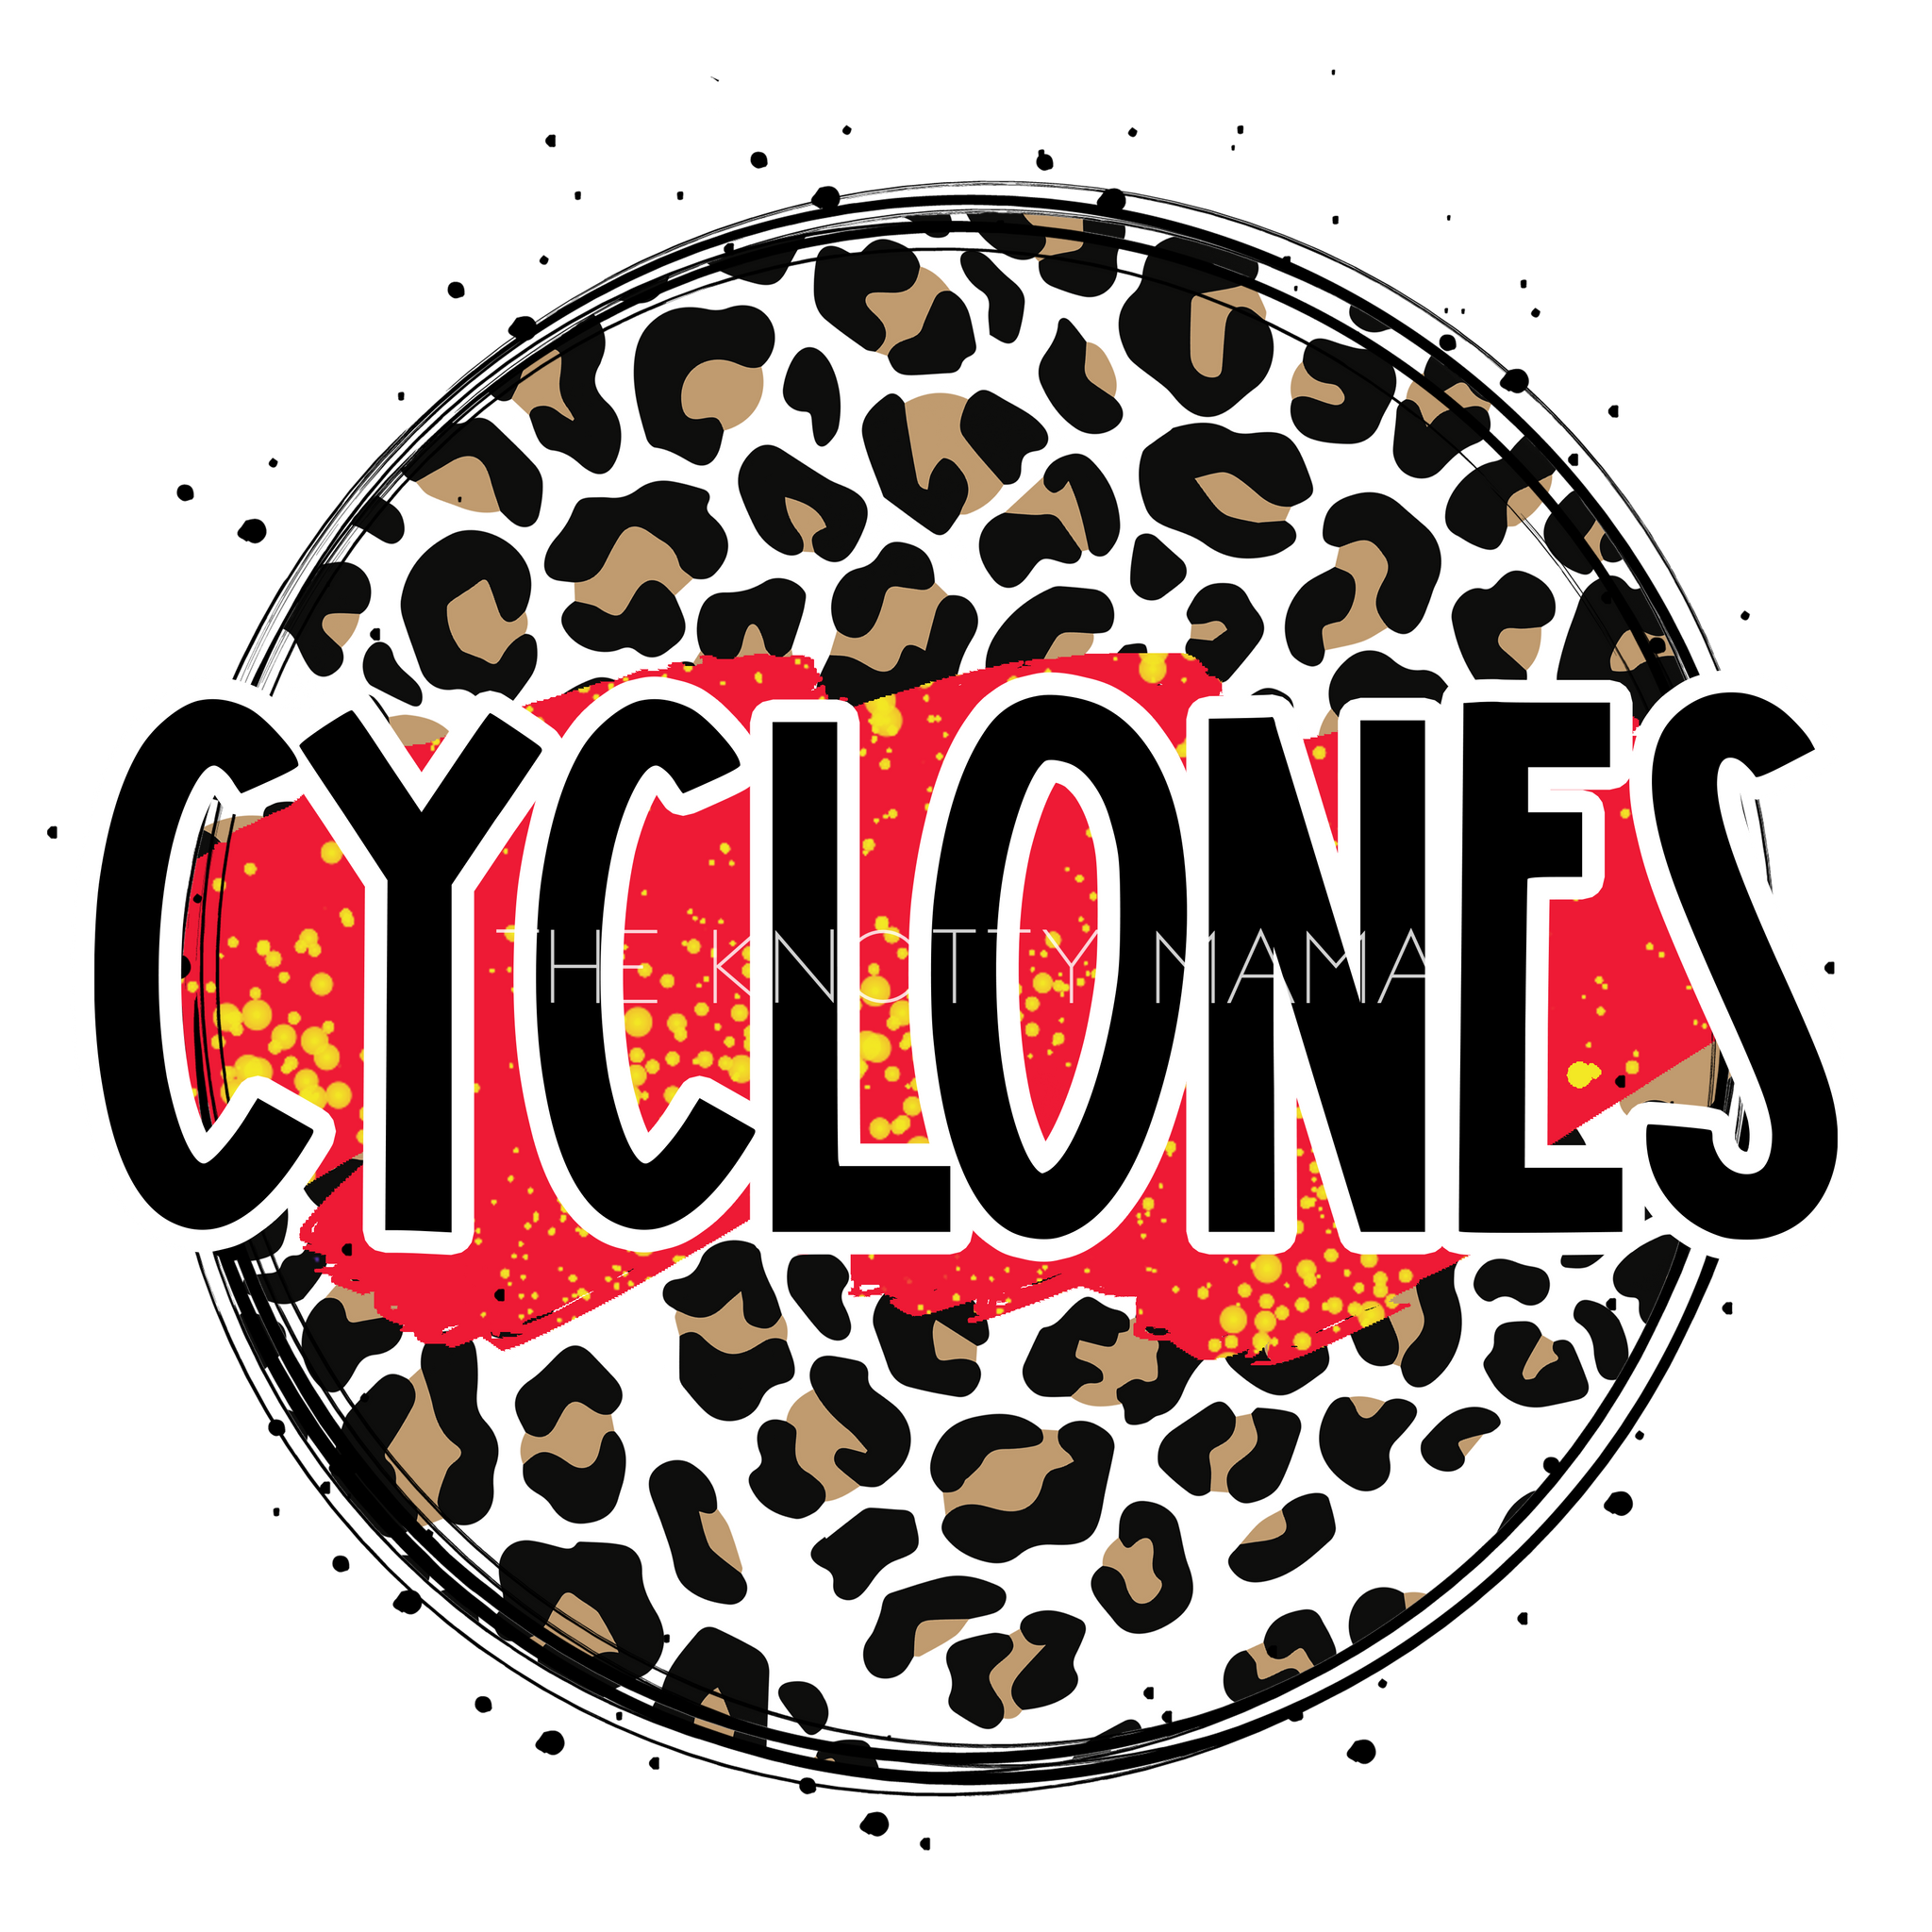 Red and Yellow Cyclones - Leopard Circle PNG